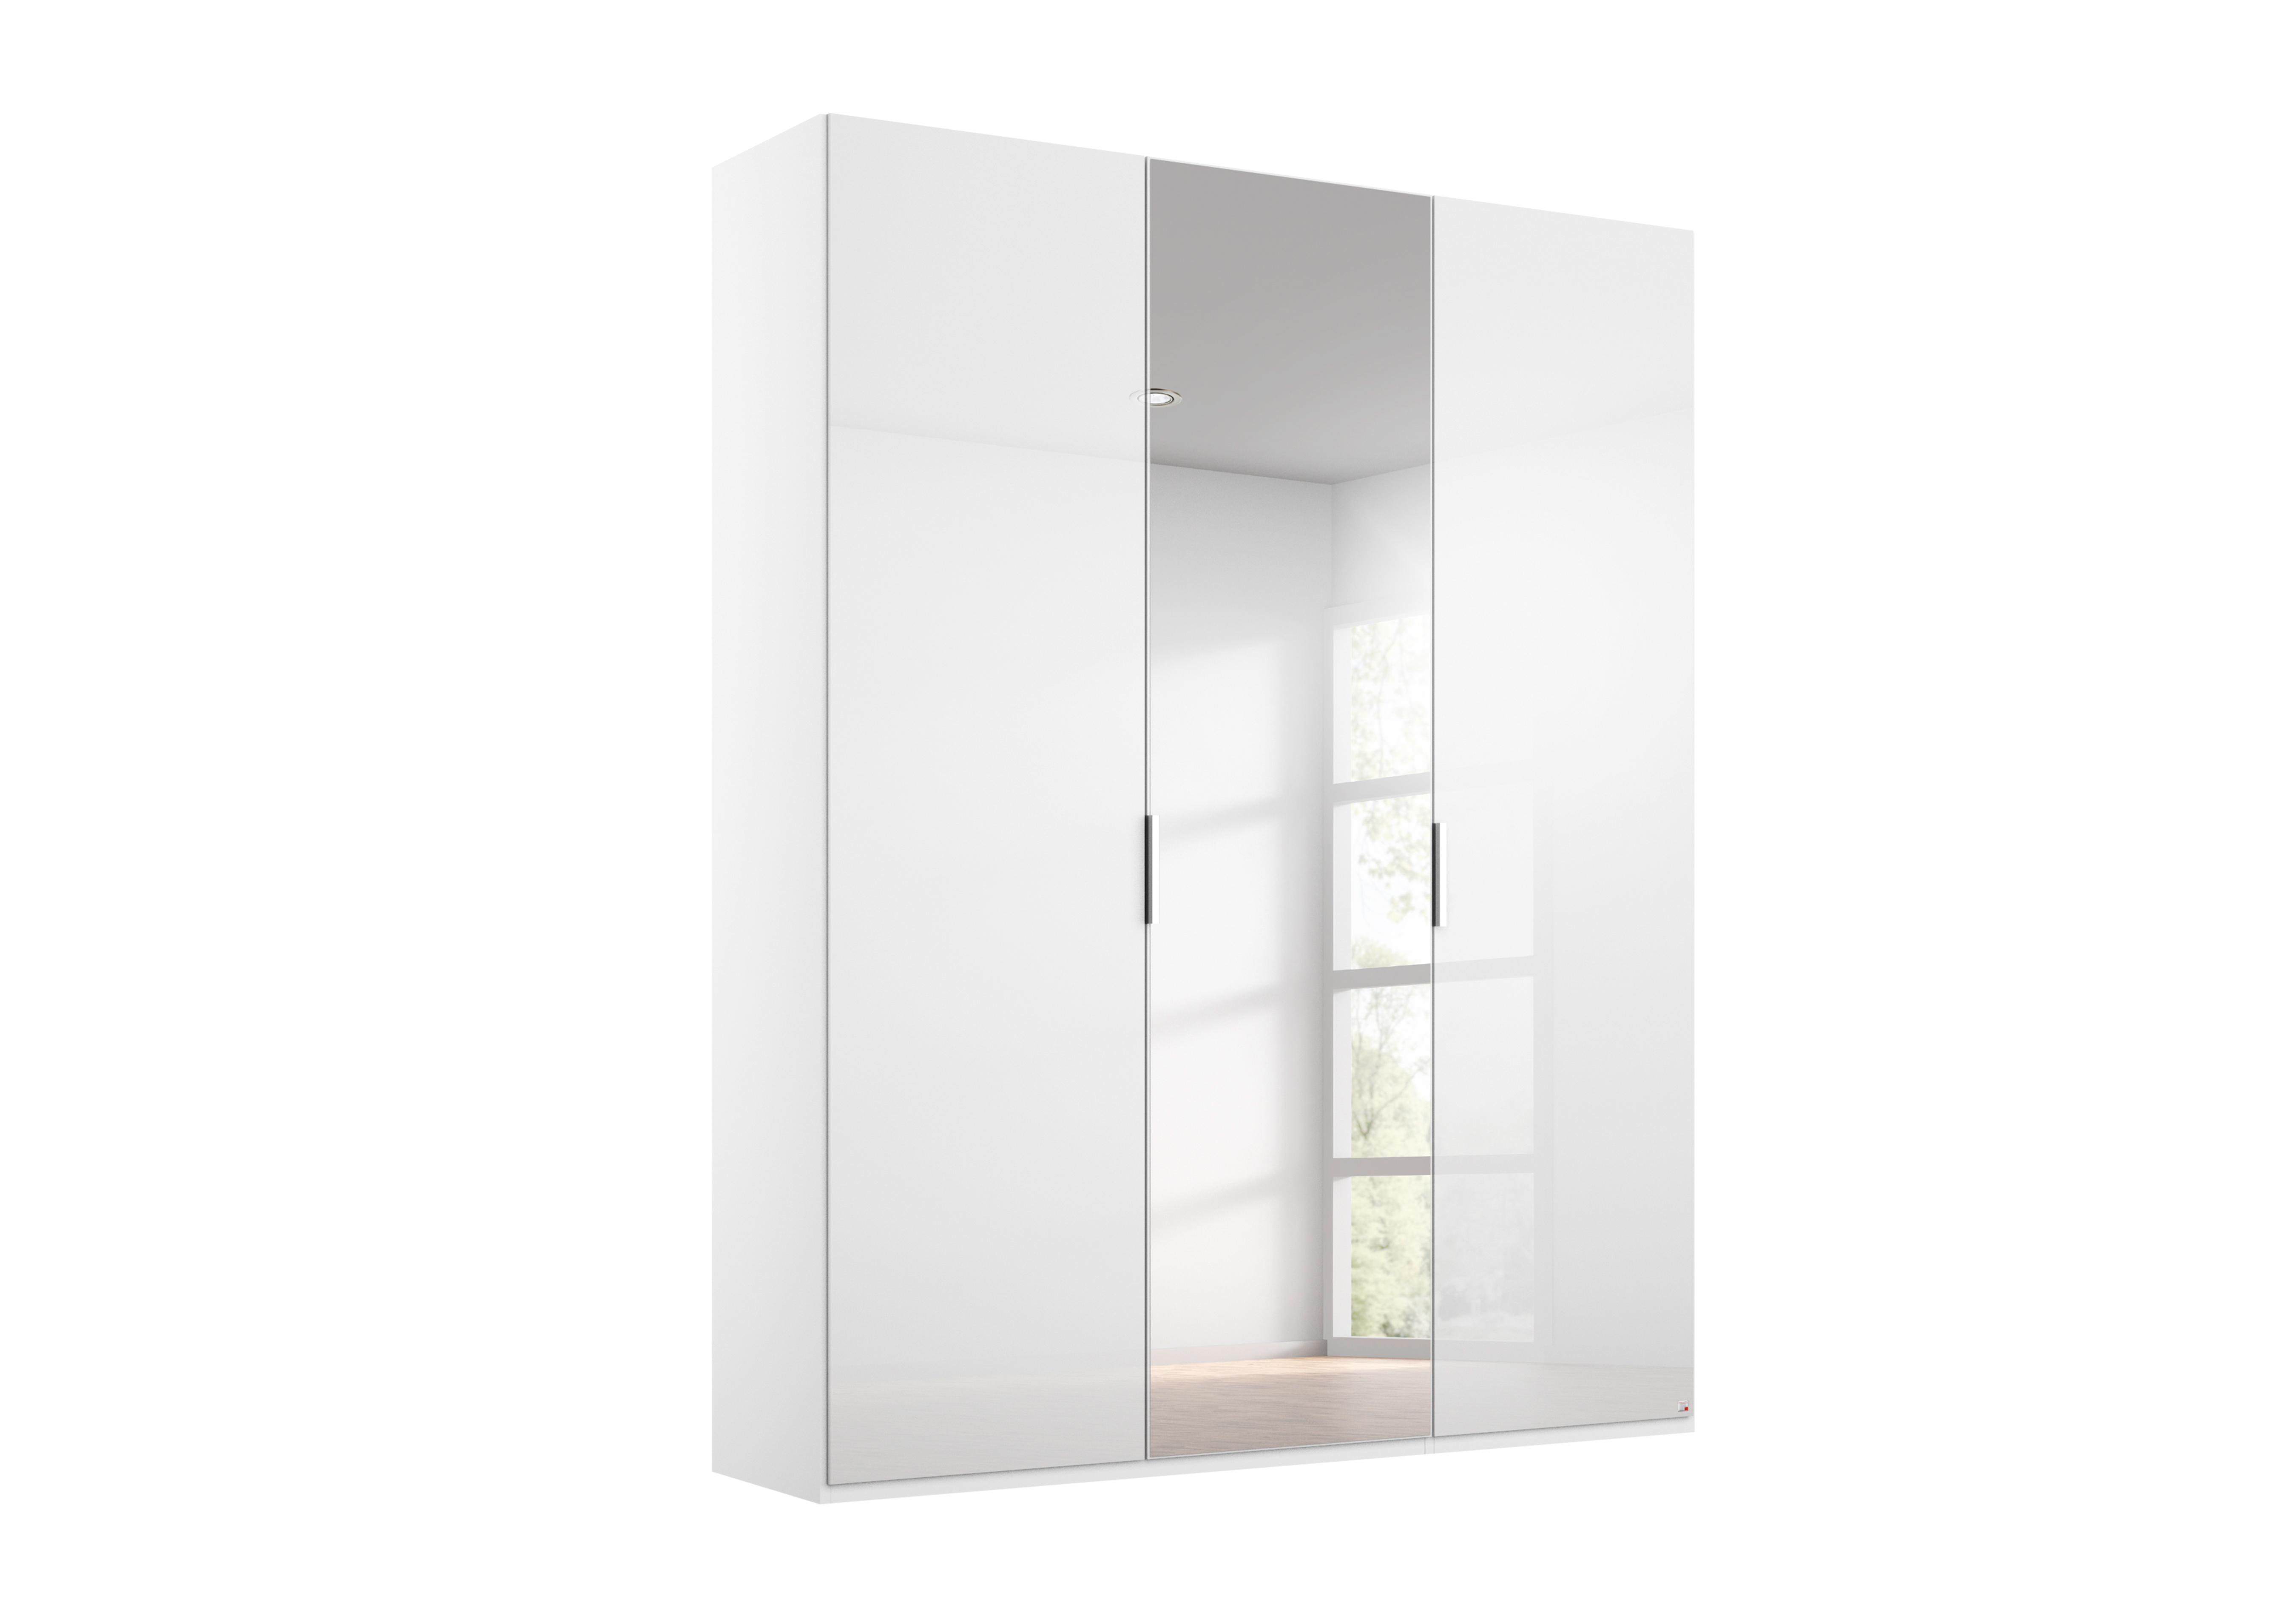 Formes Glass 3 Door Hinged Wardrobe with 1 Mirror in A131b White White Front on Furniture Village